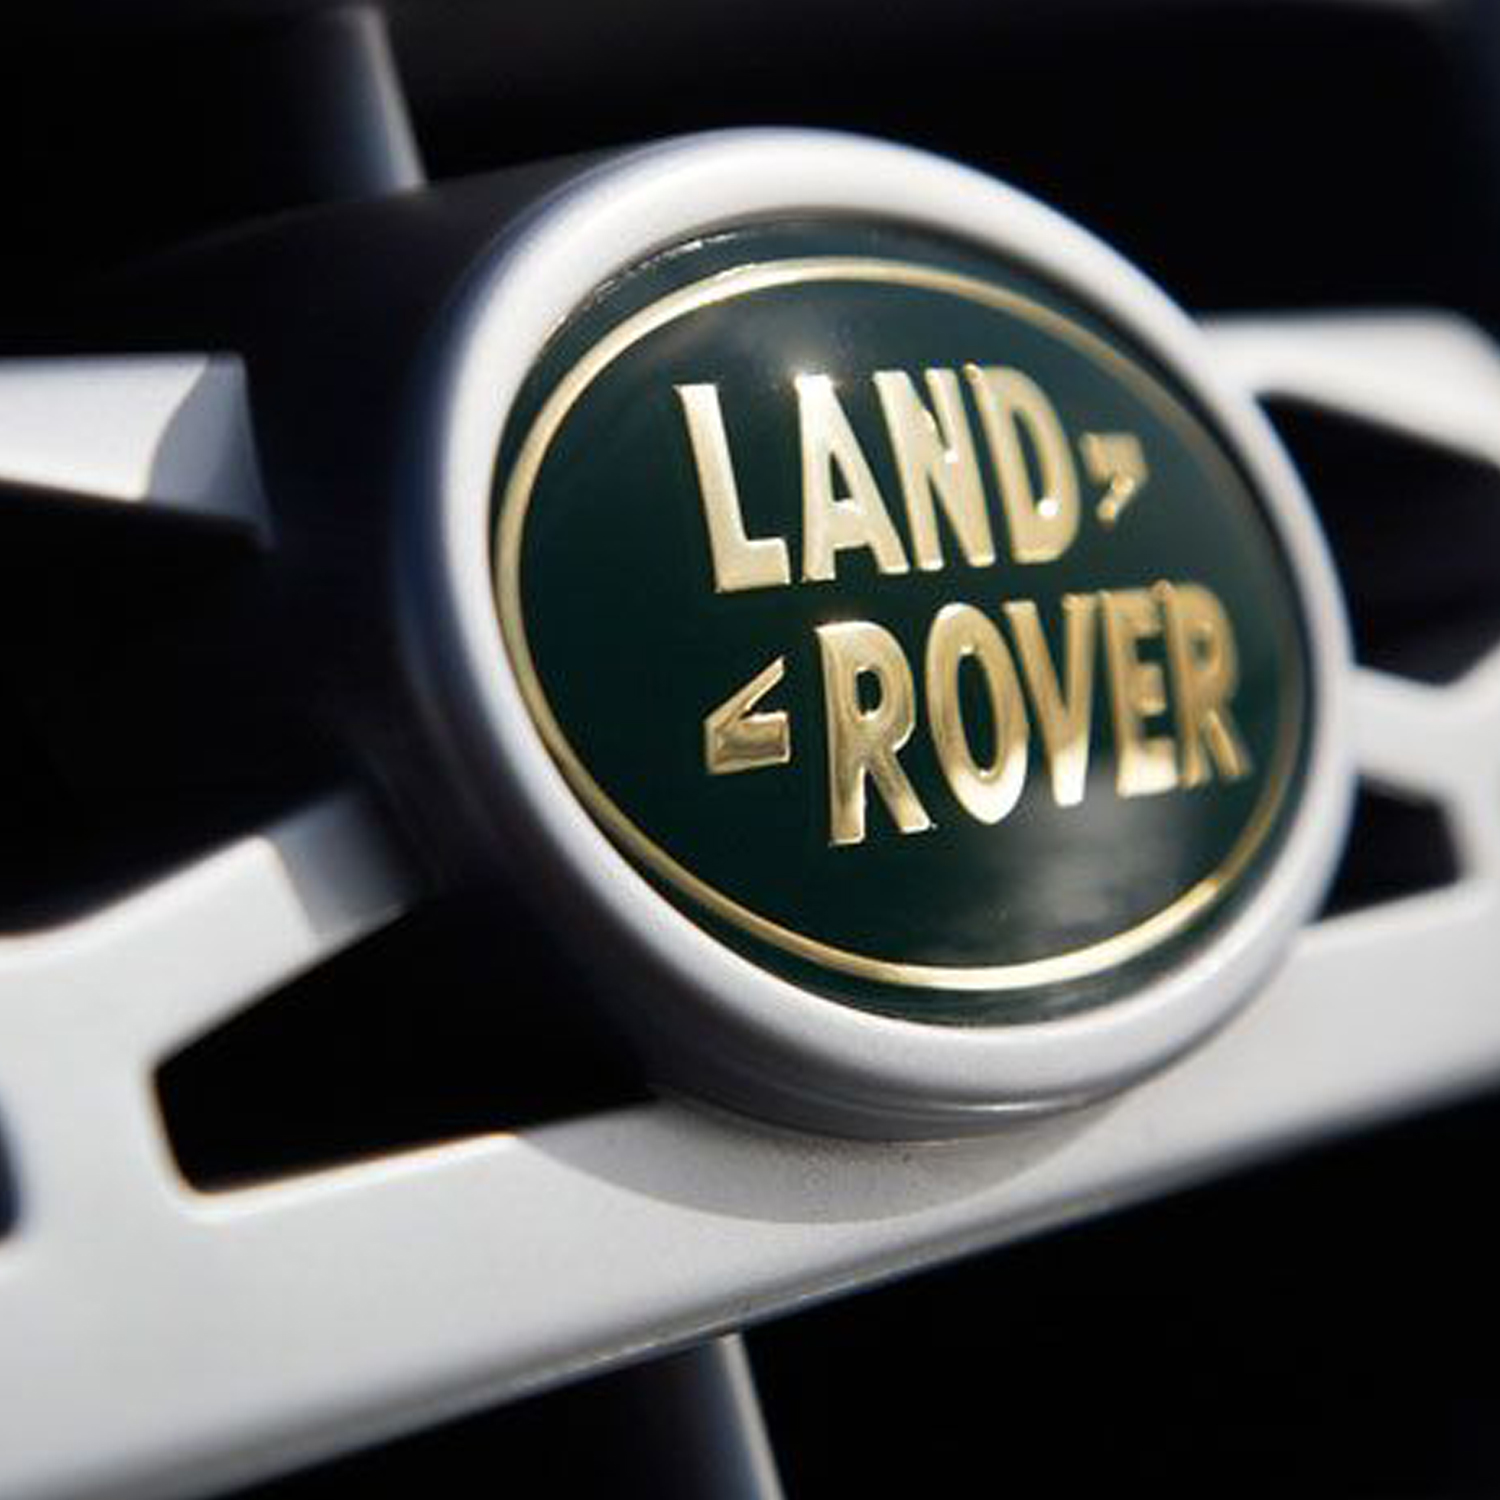 Land Rover SmartTops